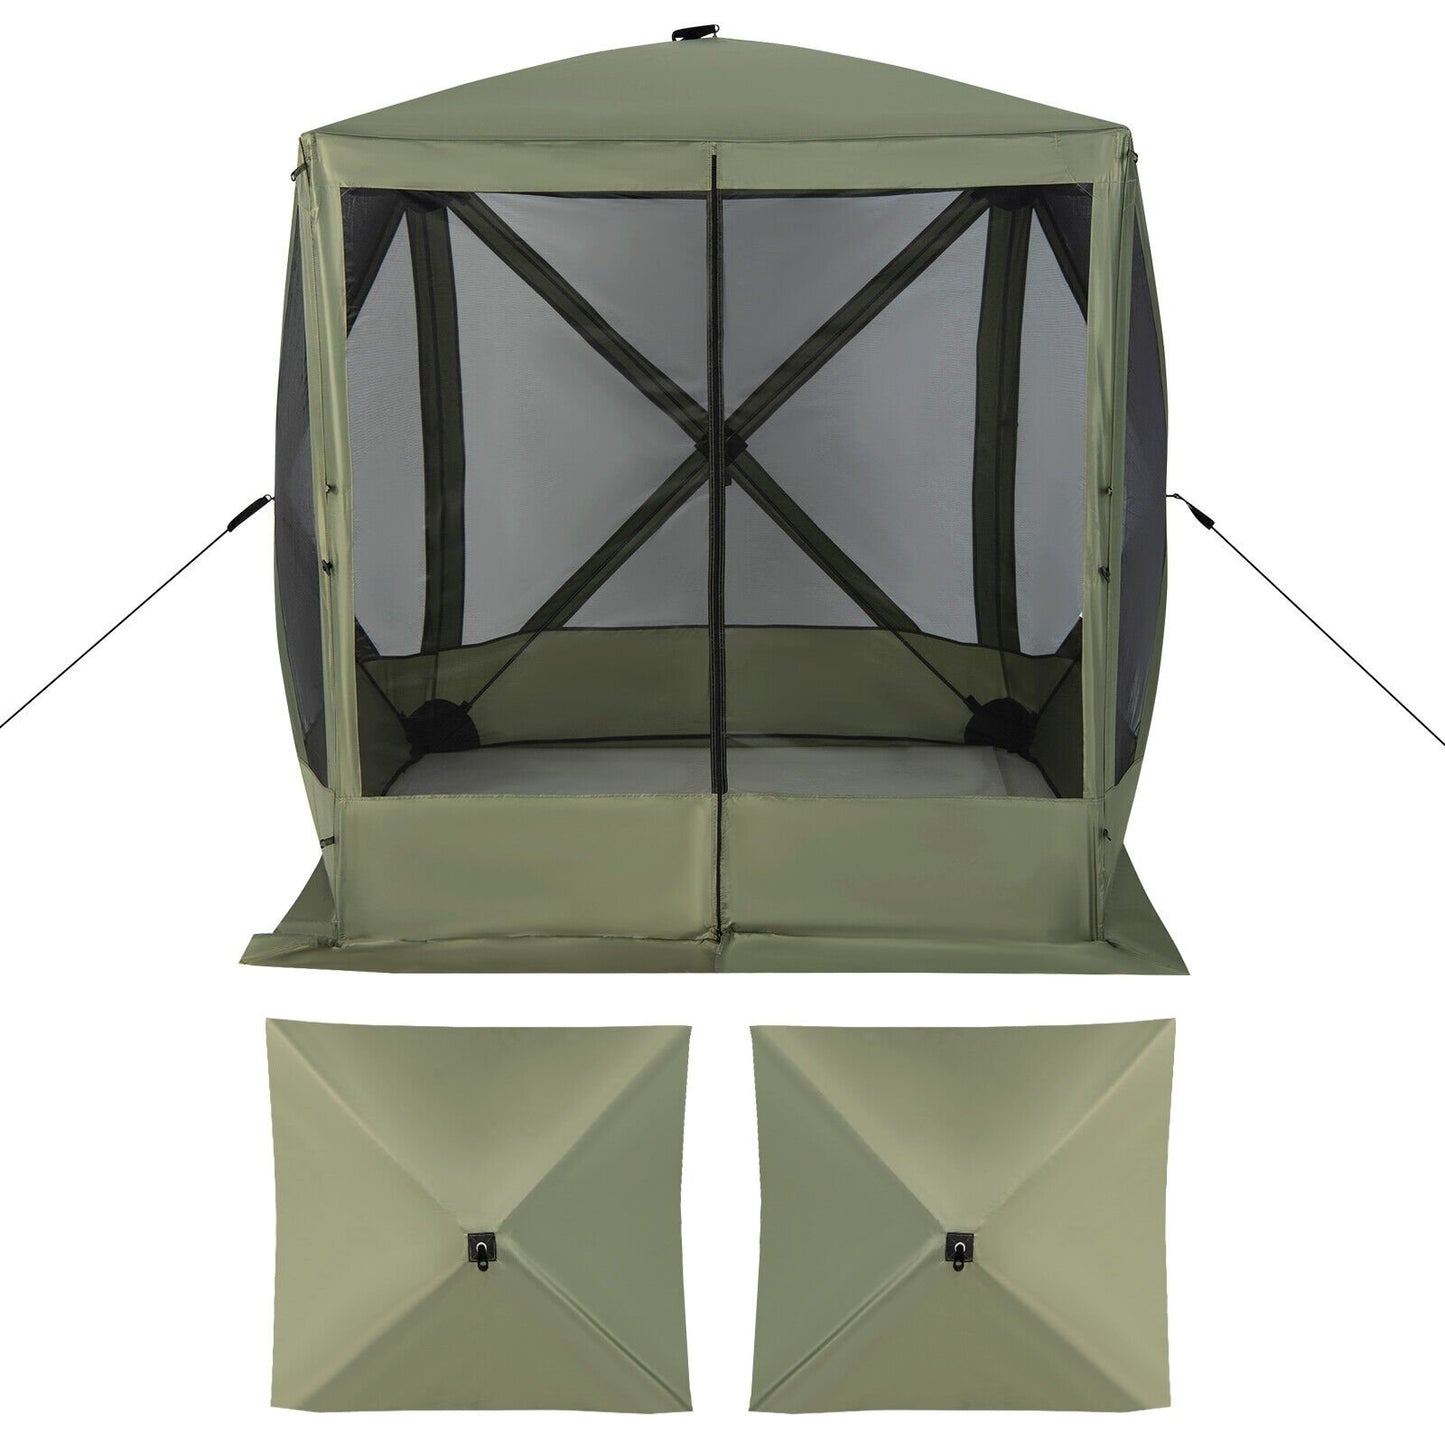 6.7 x 6.7 Feet Pop Up Gazebo with Netting and Carry Bag, Green - Gallery Canada